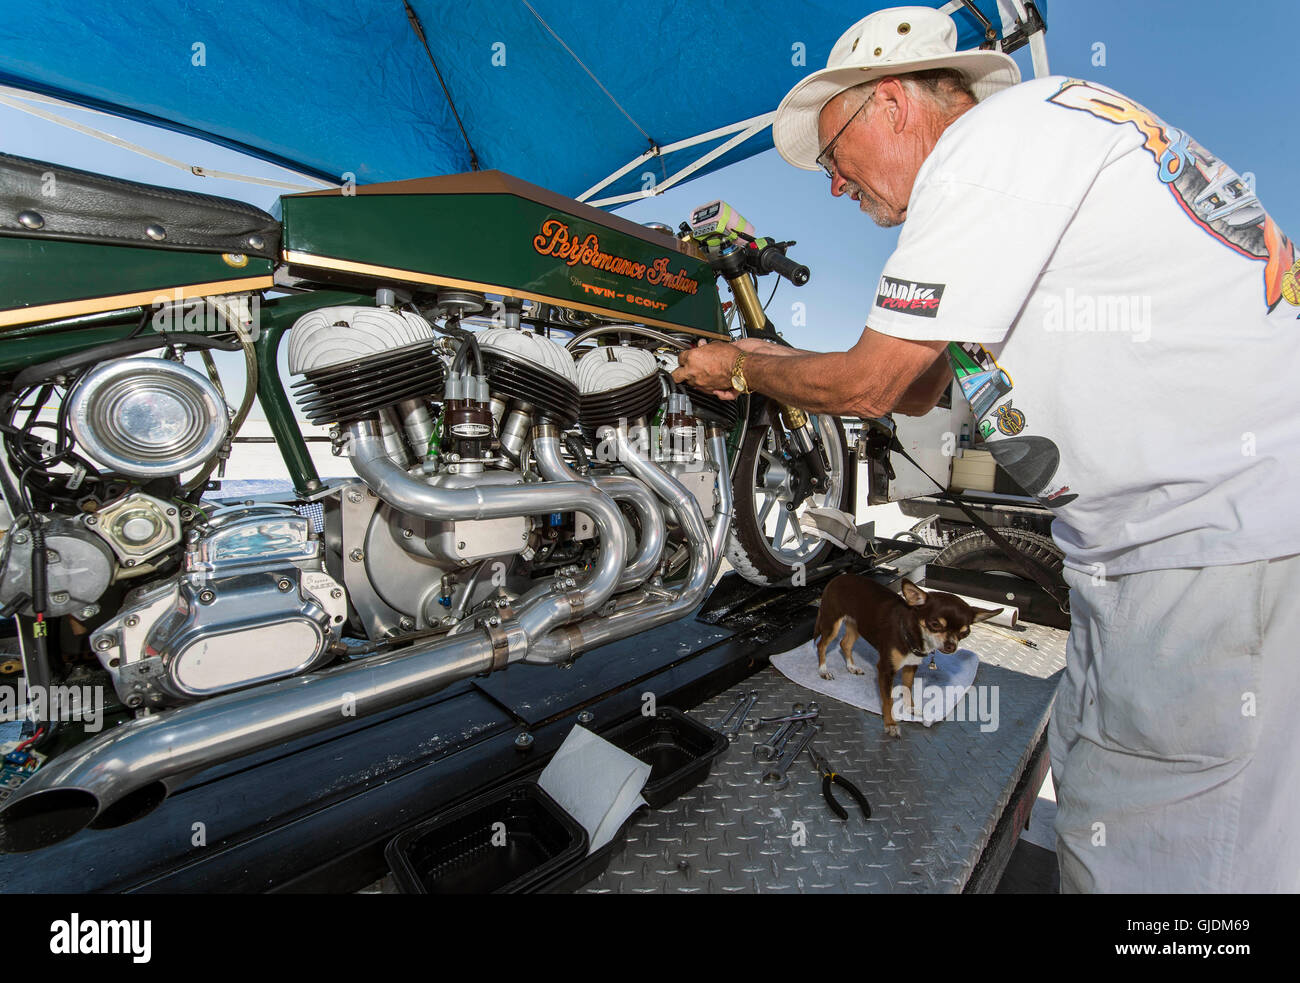 Wendover, Utah, USA. 14th Aug, 2016. A motorcycle is worked on in pit row during the 68th Annual Speed Week at the Bonneville Salt Flats, a dry lake bed some 110 miles west of Salt Lake City. Bonneville, with its wide, flat expanse of hard-packed salt, has been the site of numerous attempts at world land speed records. Credit:  Brian Cahn/ZUMA Wire/Alamy Live News Stock Photo